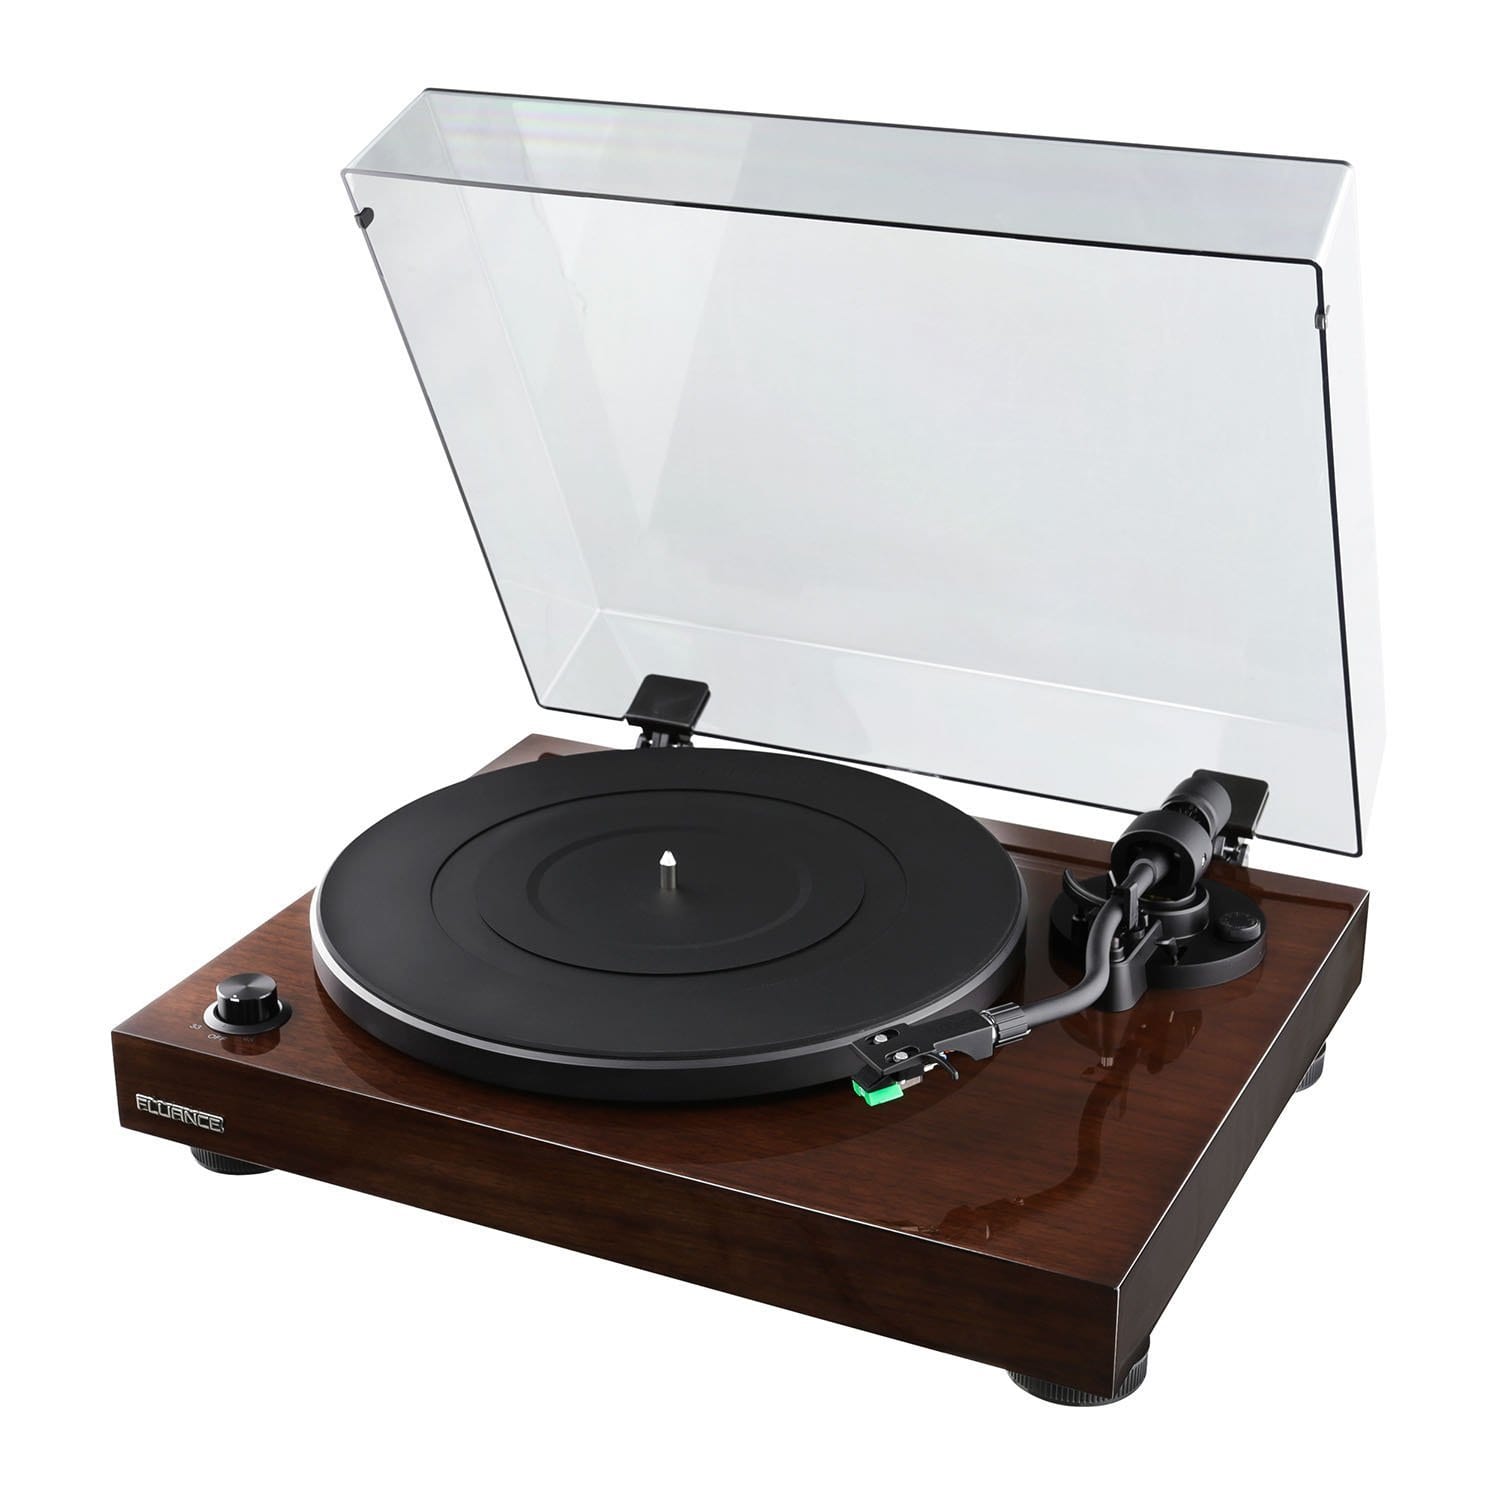 Best Turntable & Record Player 2017: Fluance